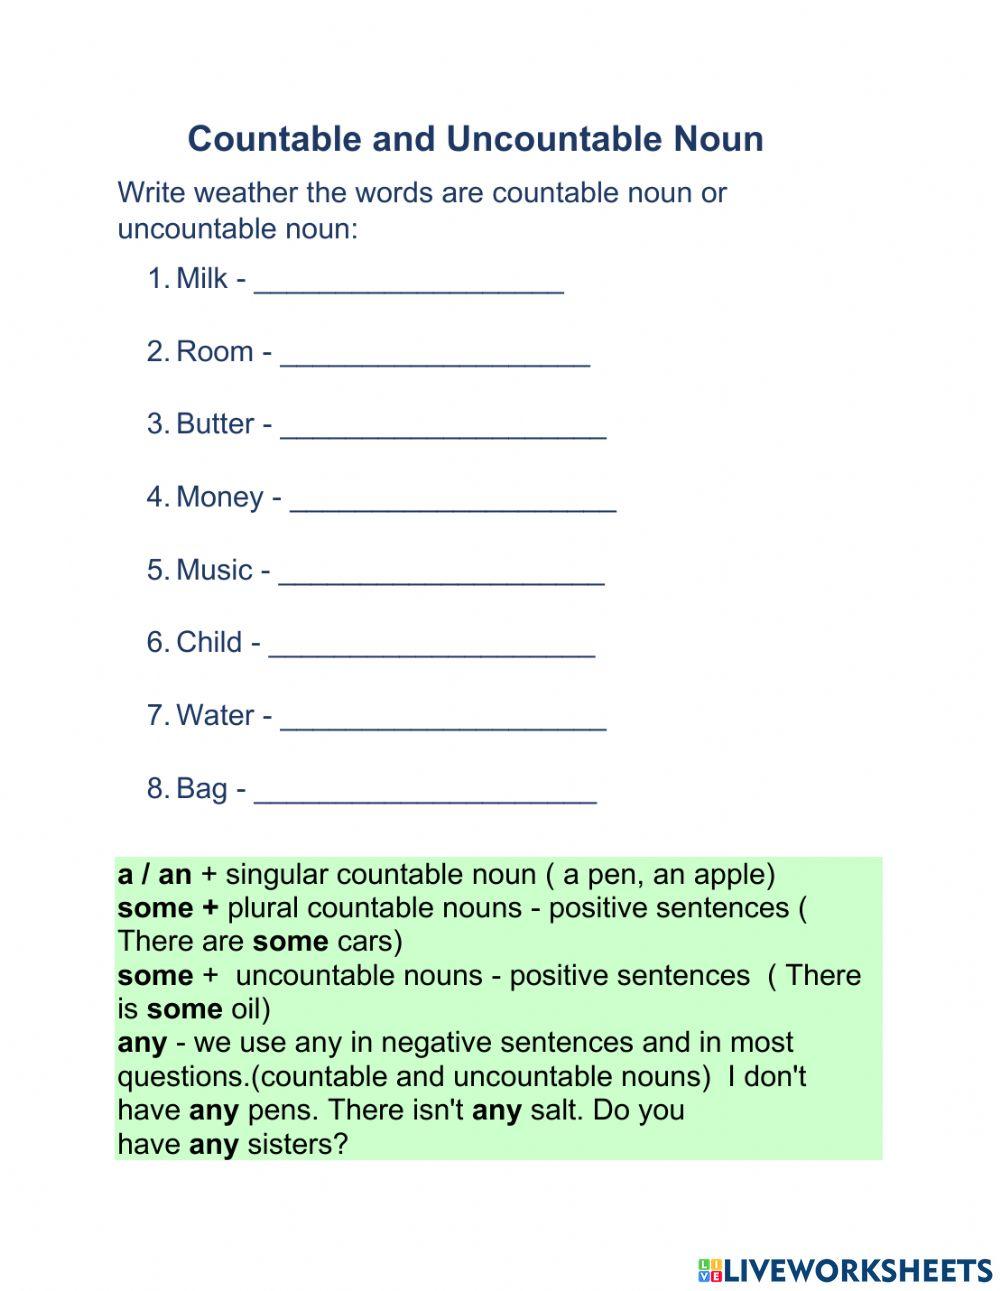 Countable and Uncountable Noun Revision